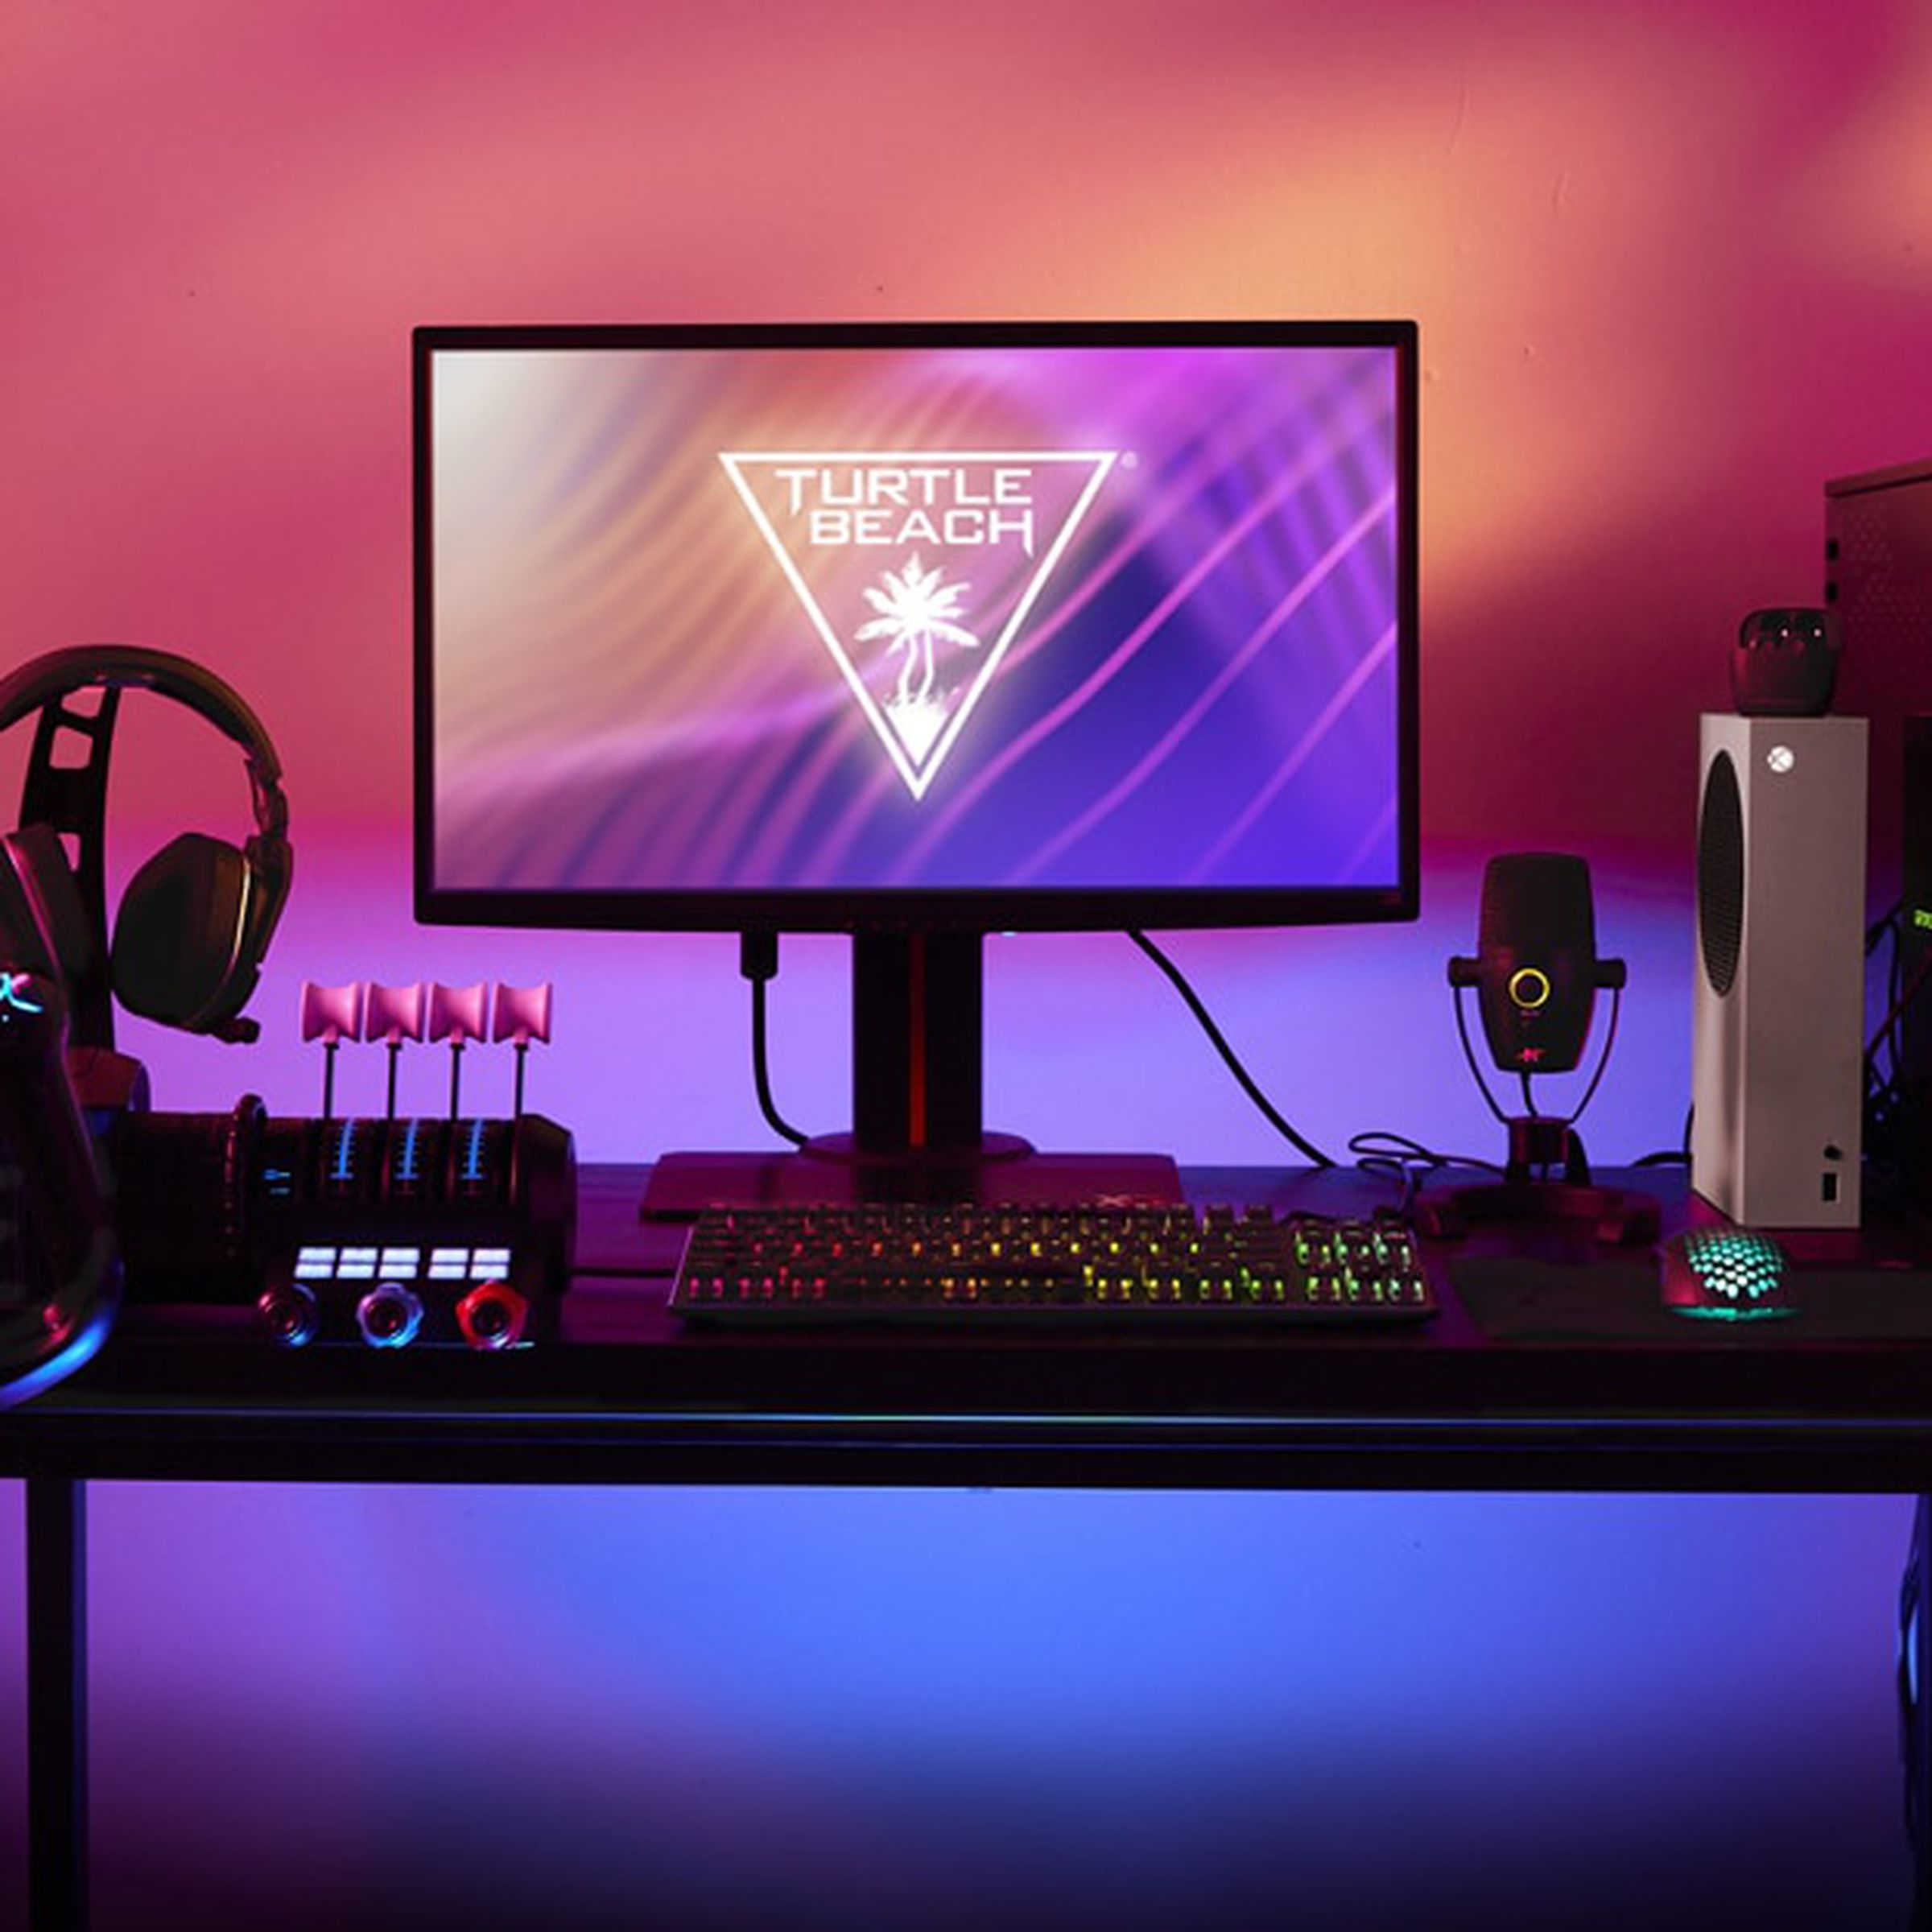 A picture of a PC with several Turtle Beach accessories on the desk.